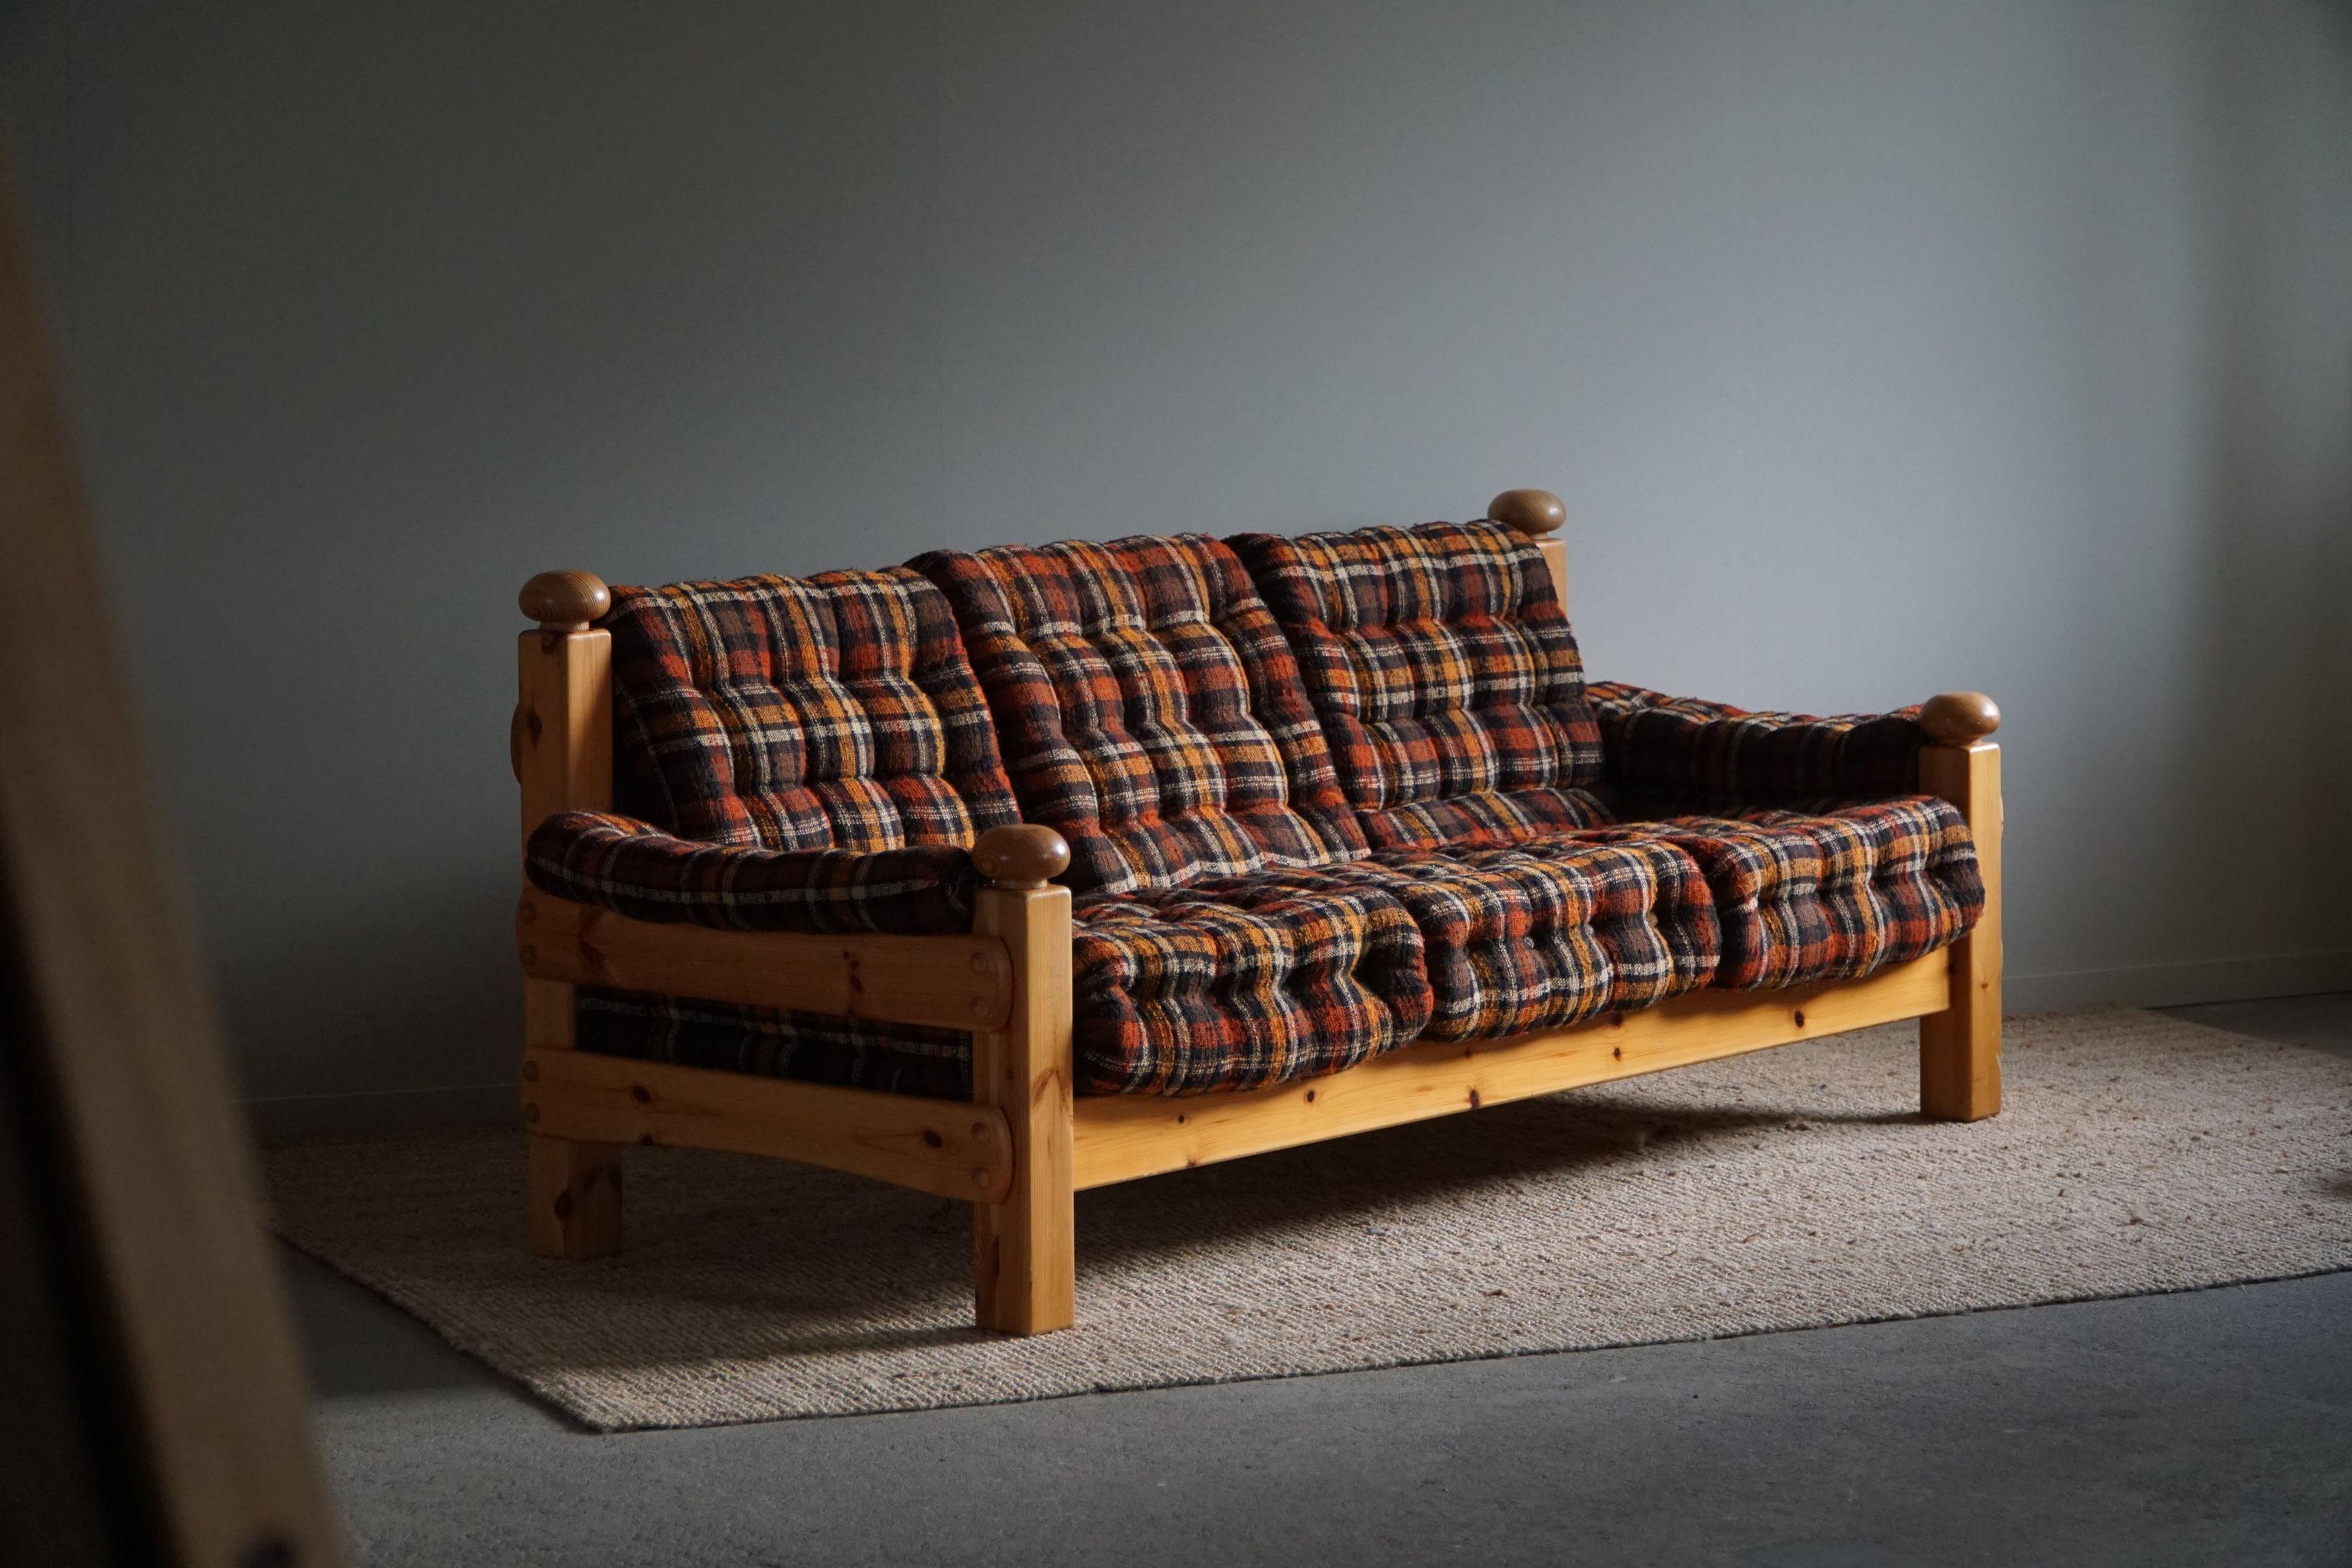 Three Seater Brutalist Sofa in Solid Pine, Swedish Modern, Made in the 1970s For Sale 6